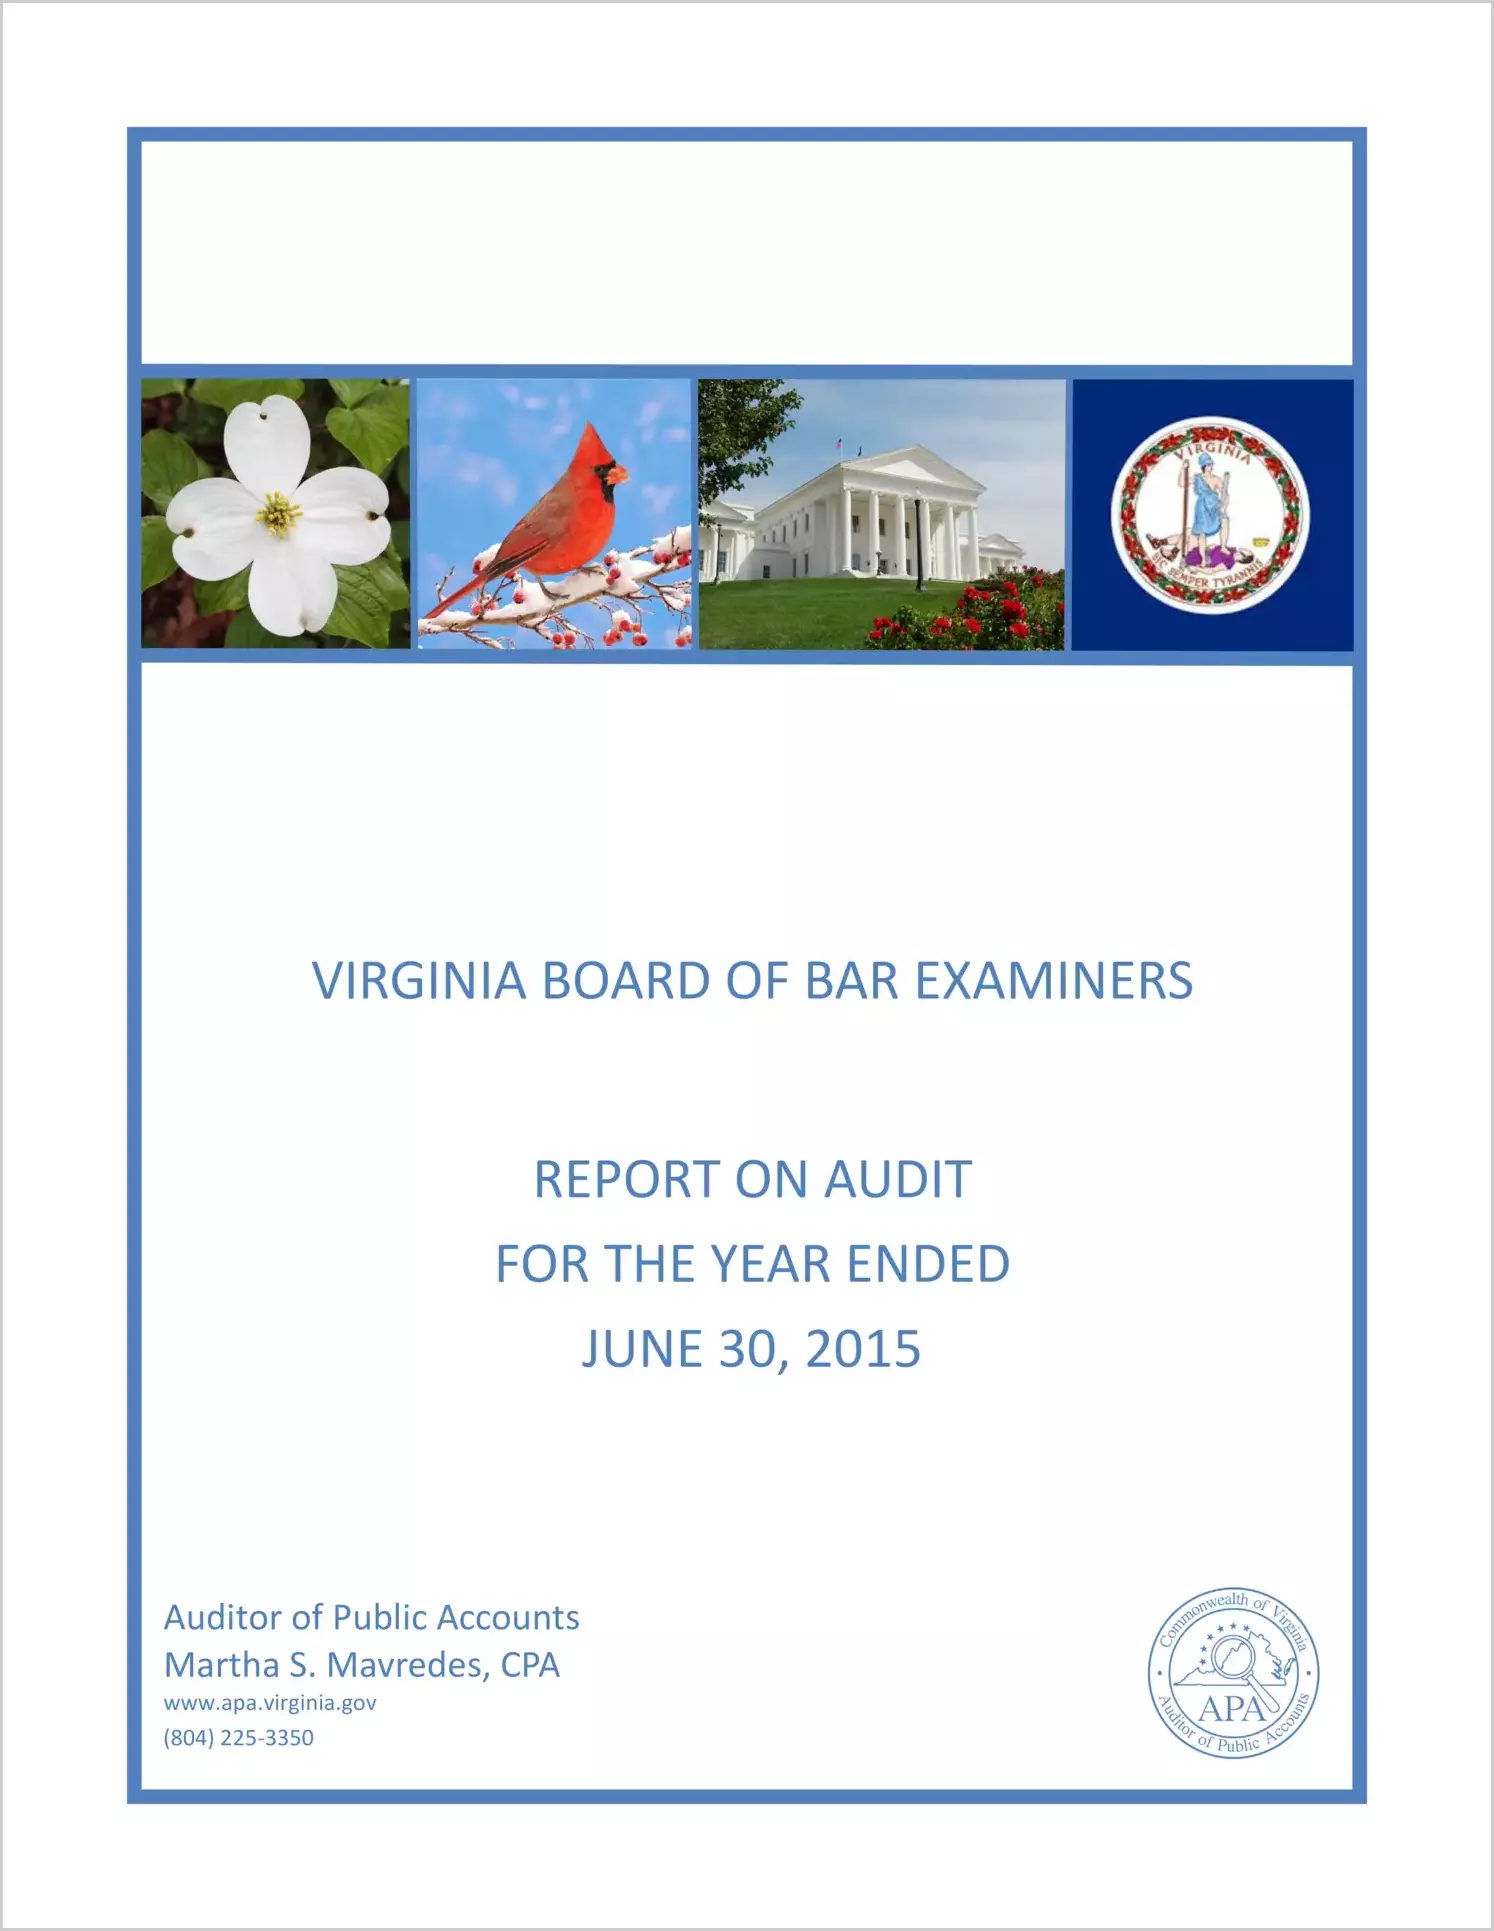 Virginia Board of Bar Examiners Report on Audit for the Year Ended June 30, 2015